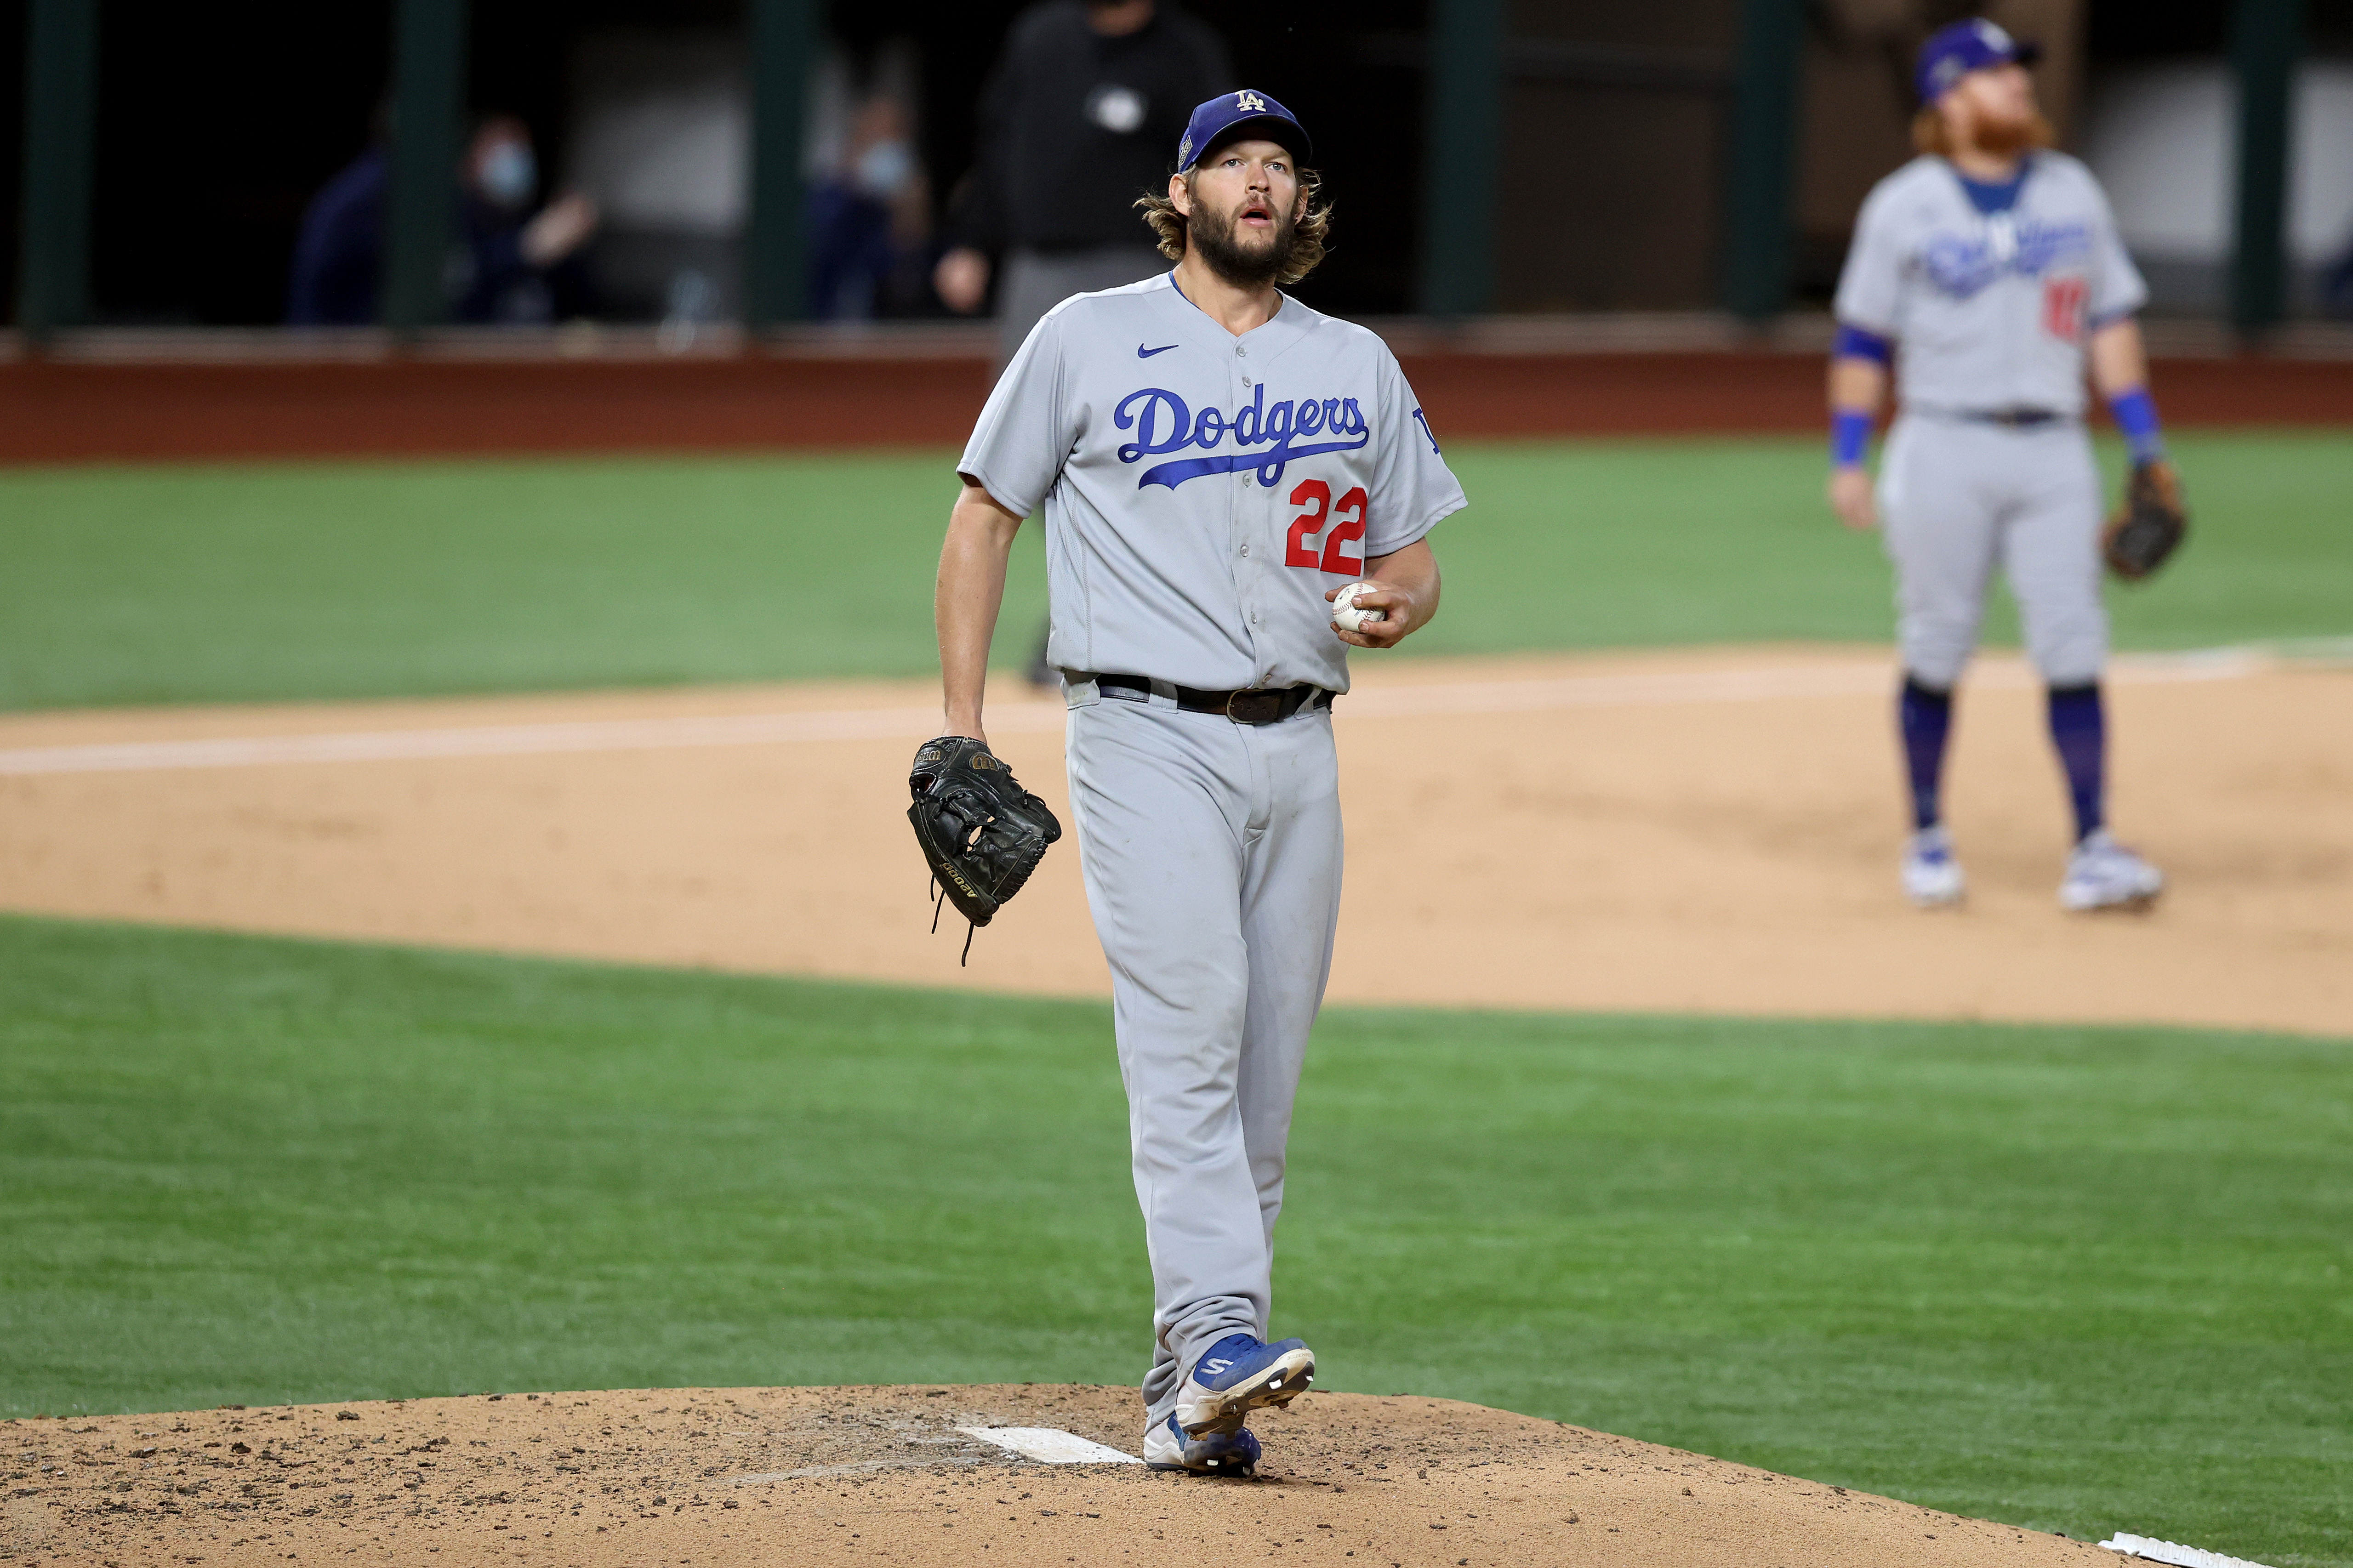 Clayton Kershaw's wife reveals pitcher's mom died day before